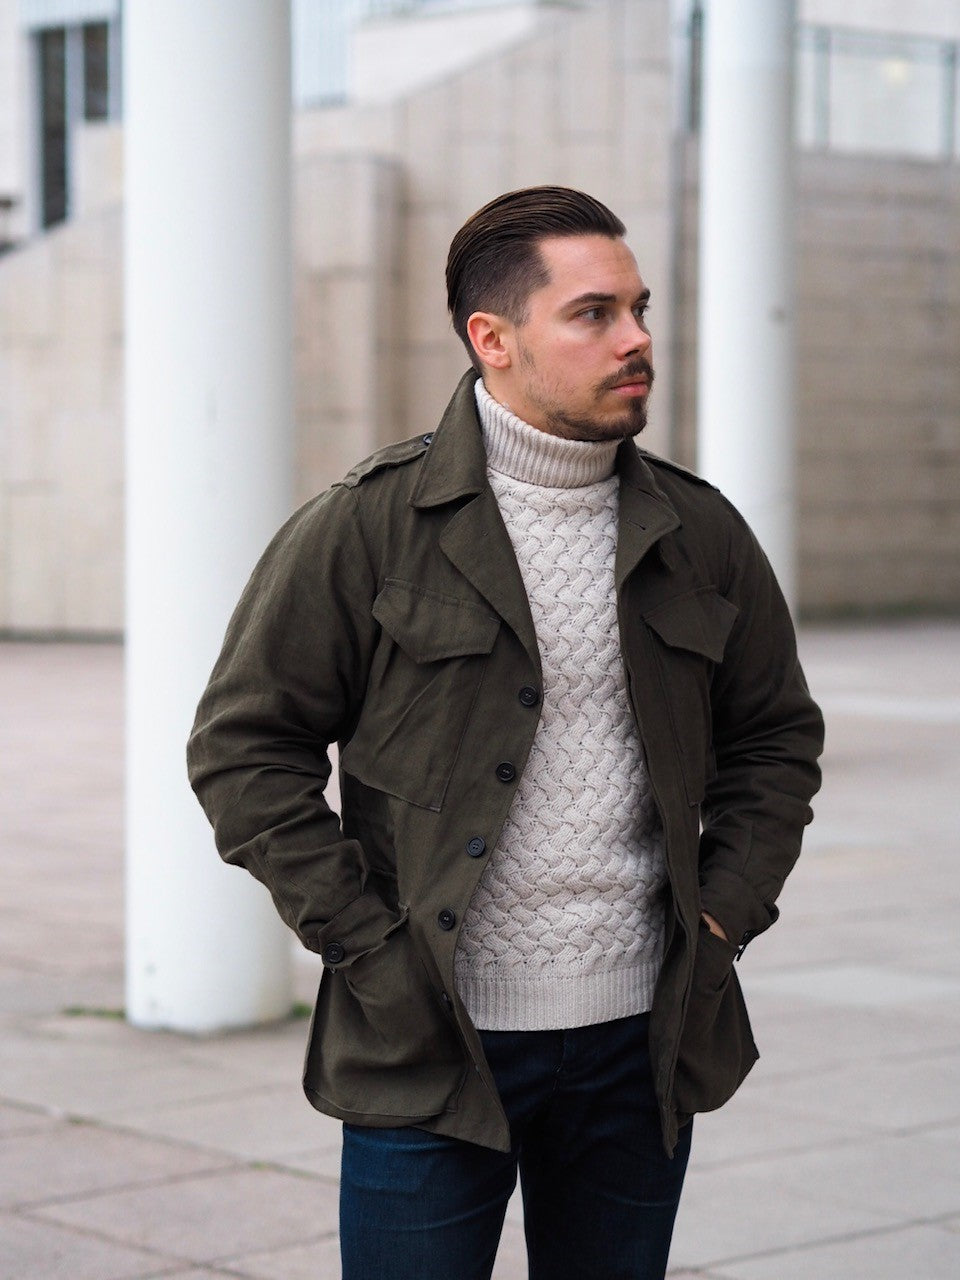 Army green field jacket with knitwear and denim